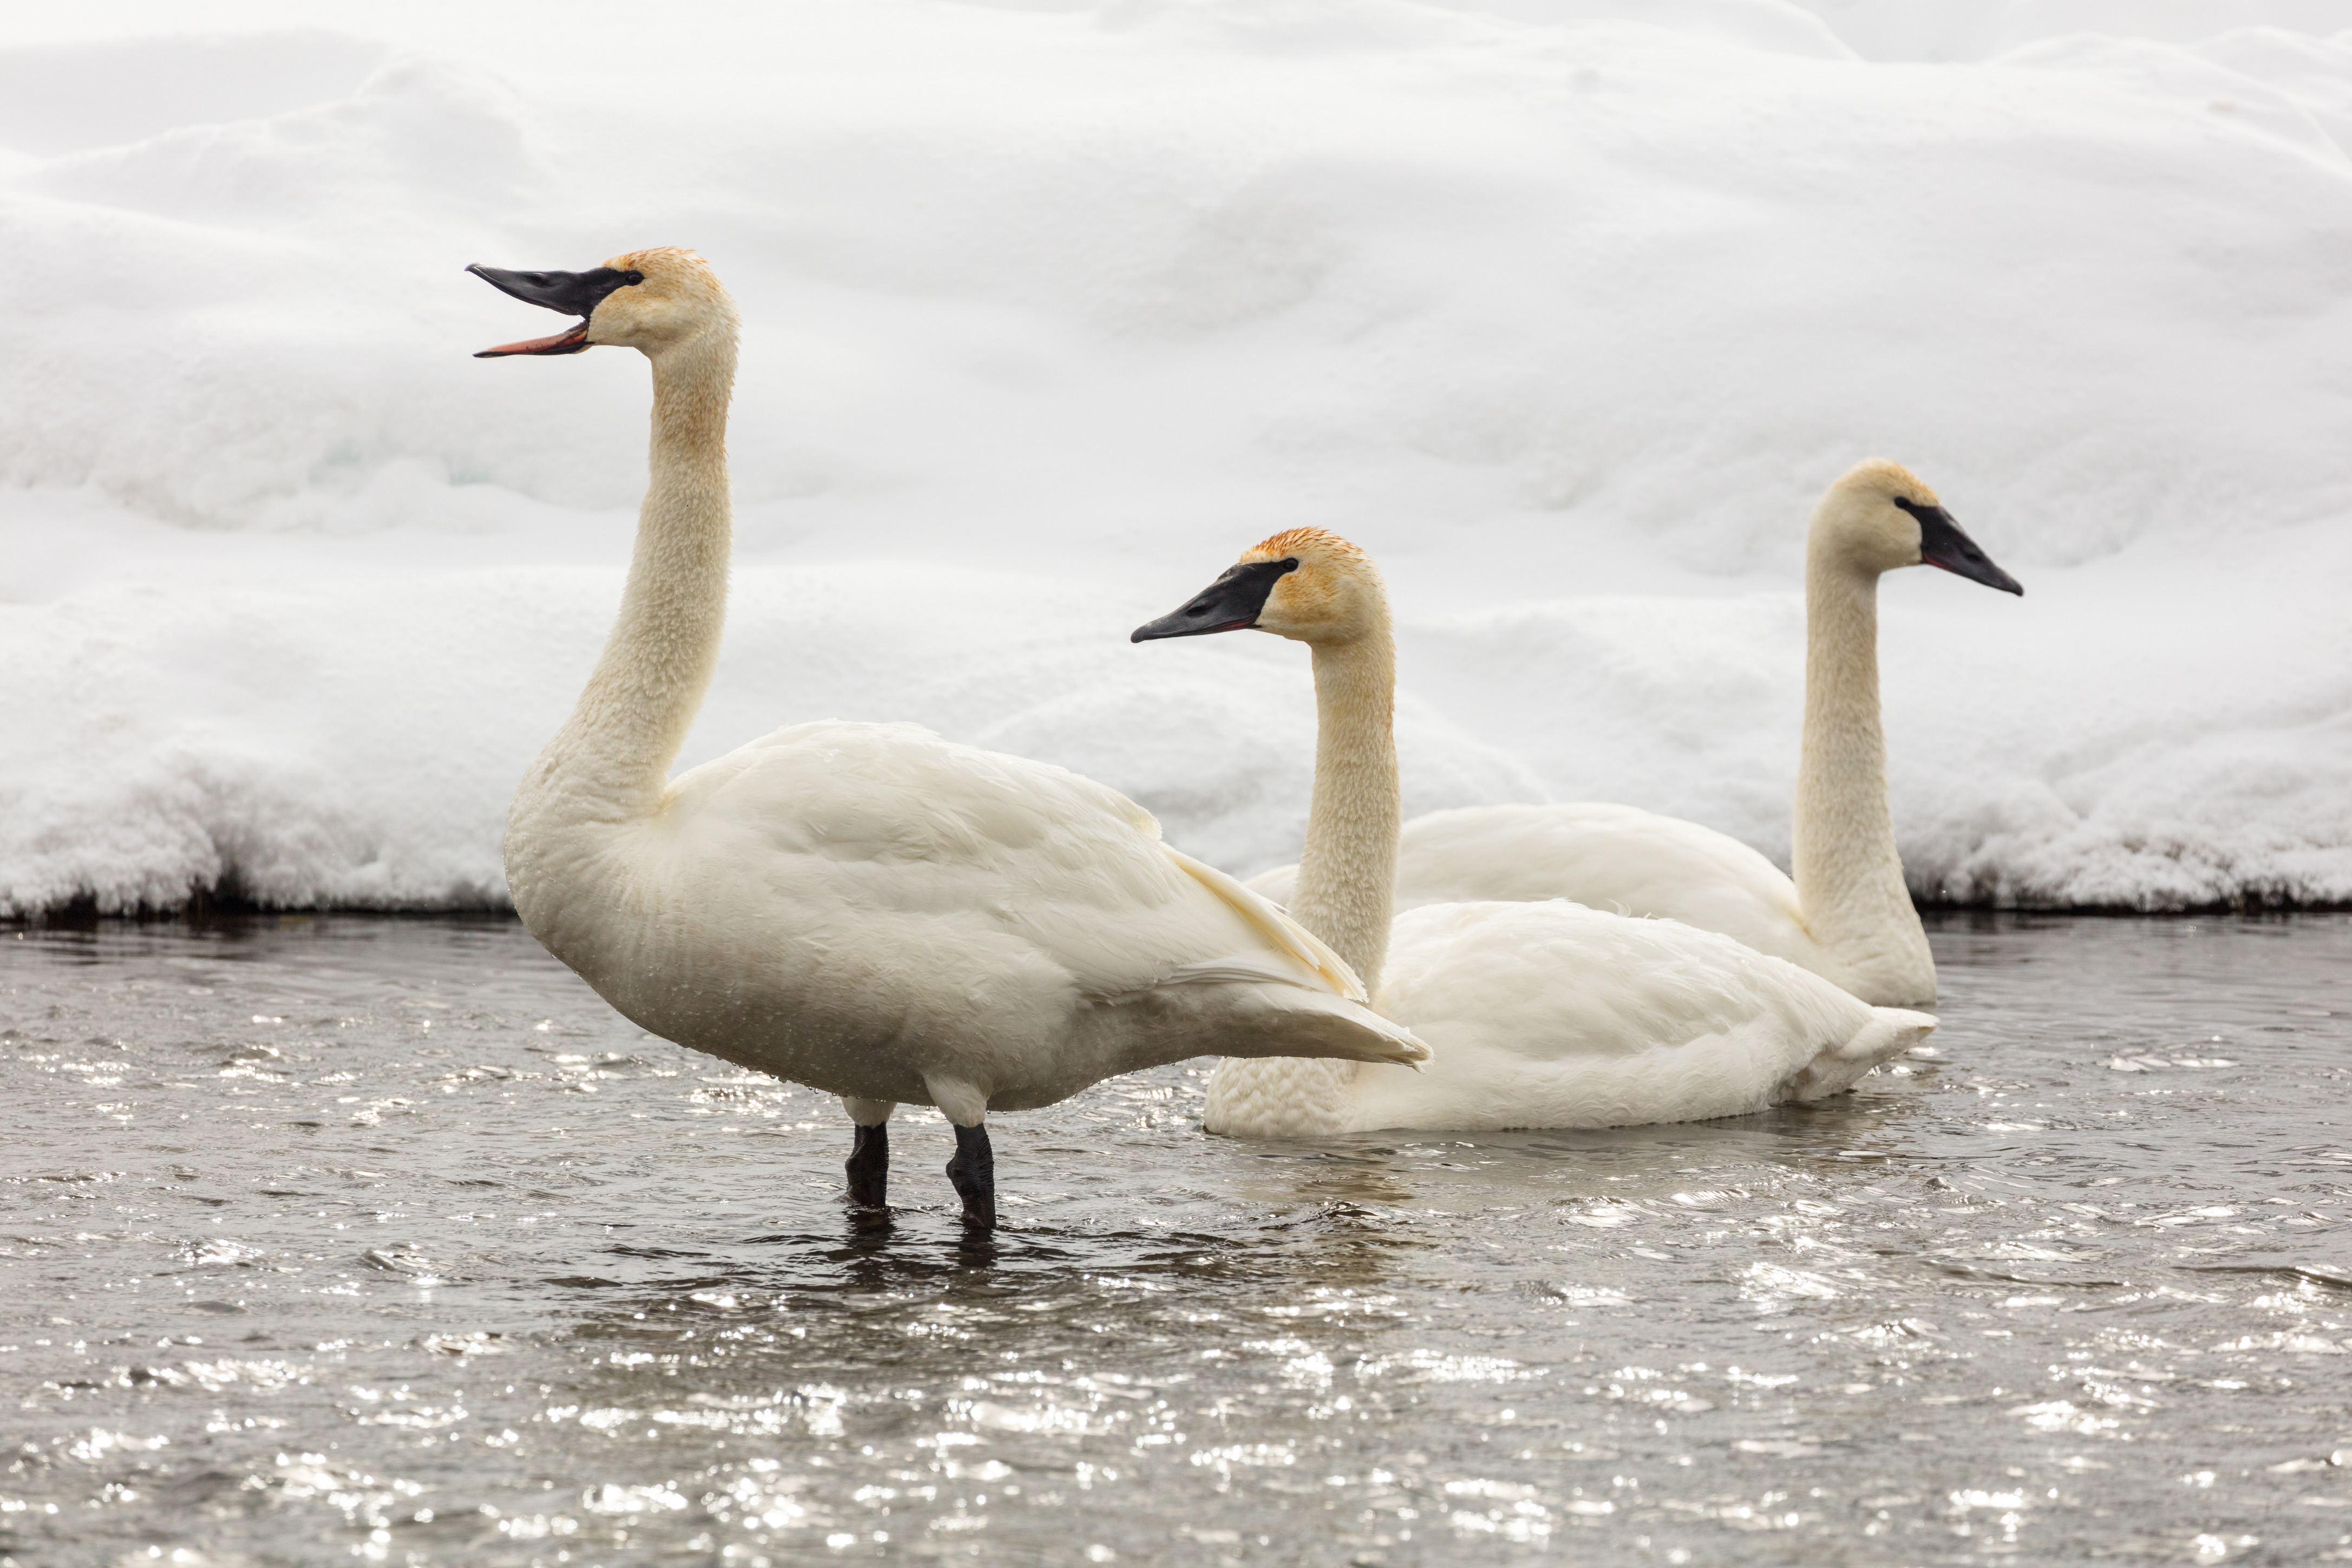 Three trumpeter swans are in the water by the snowy bank.